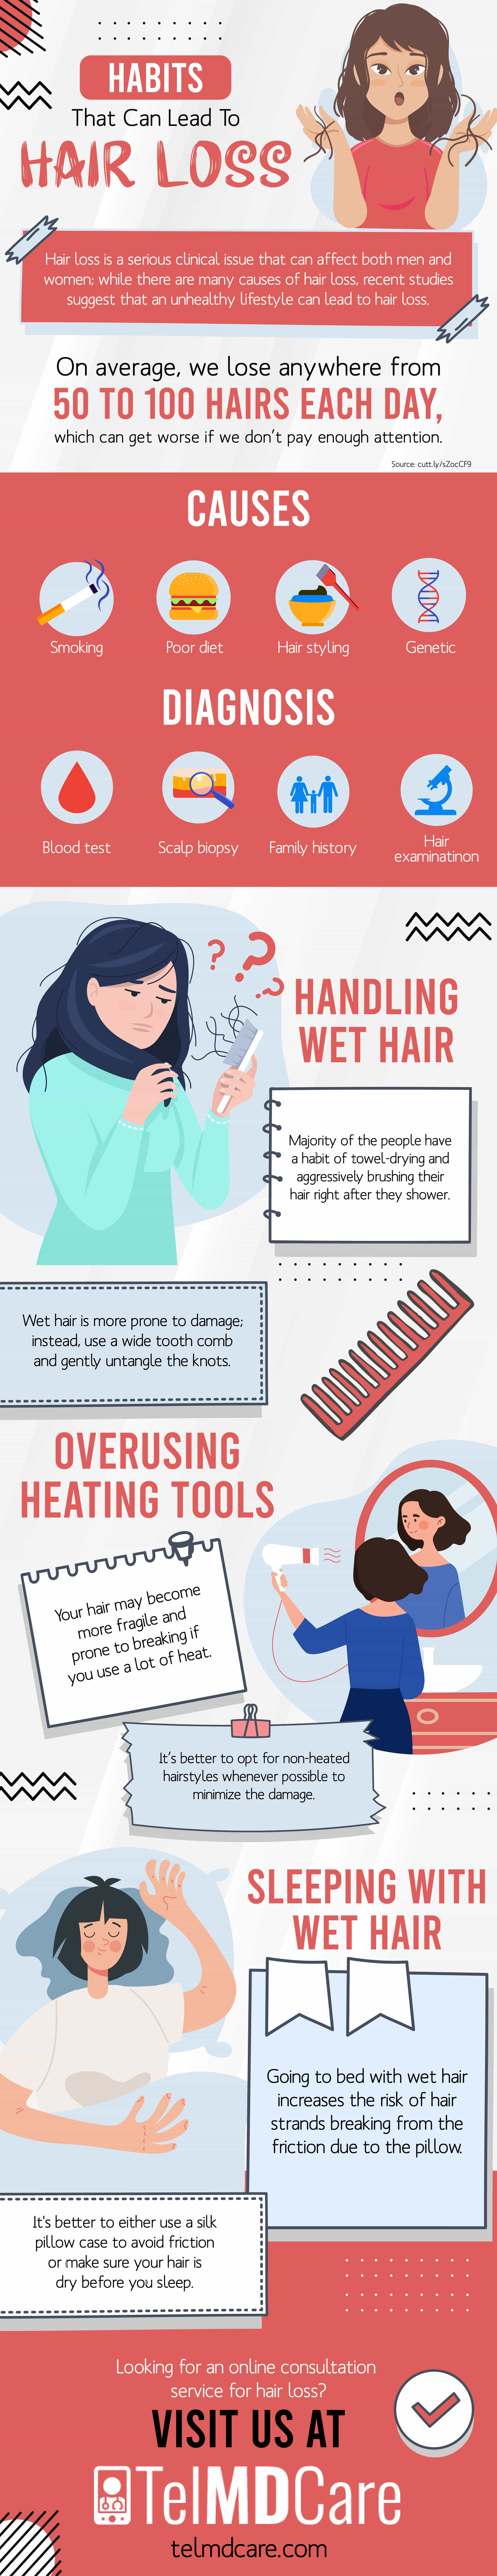 Habits That Can Lead To Hair Loss